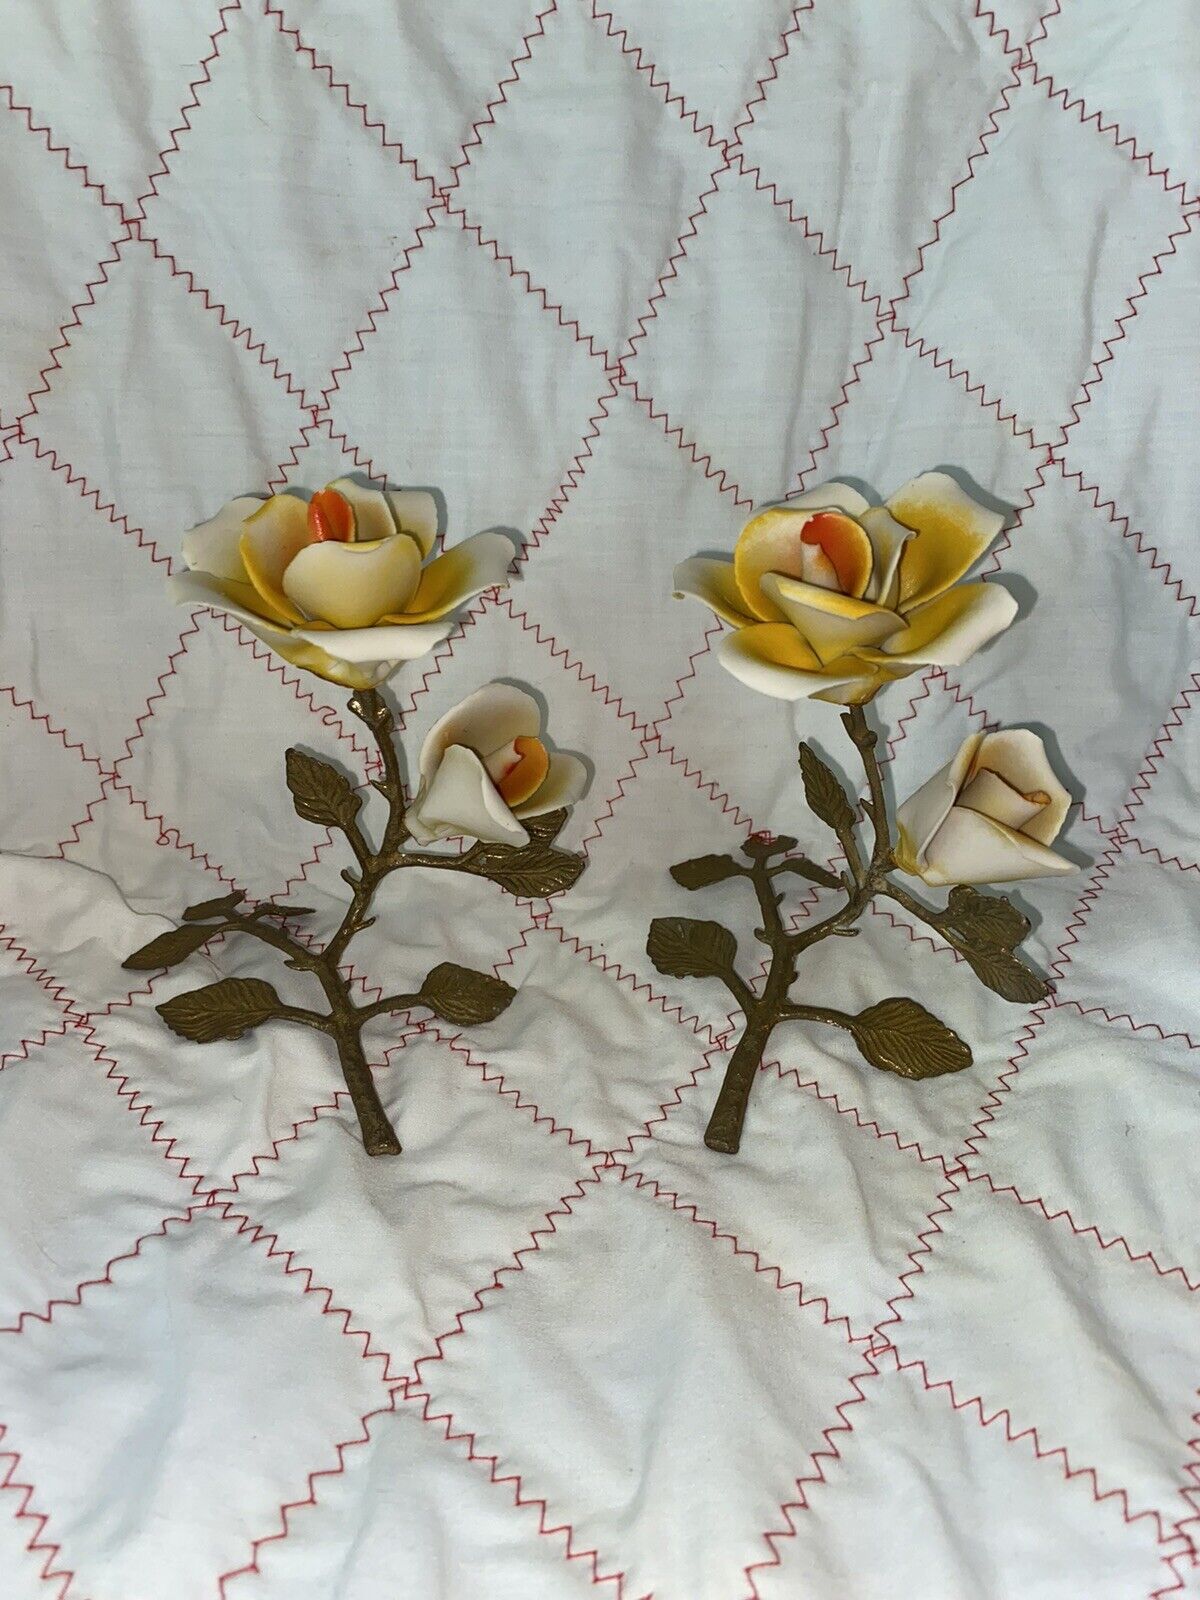 Porcelain Yellow Roses with Metal Stems Vintage Set Of 2 4.5”